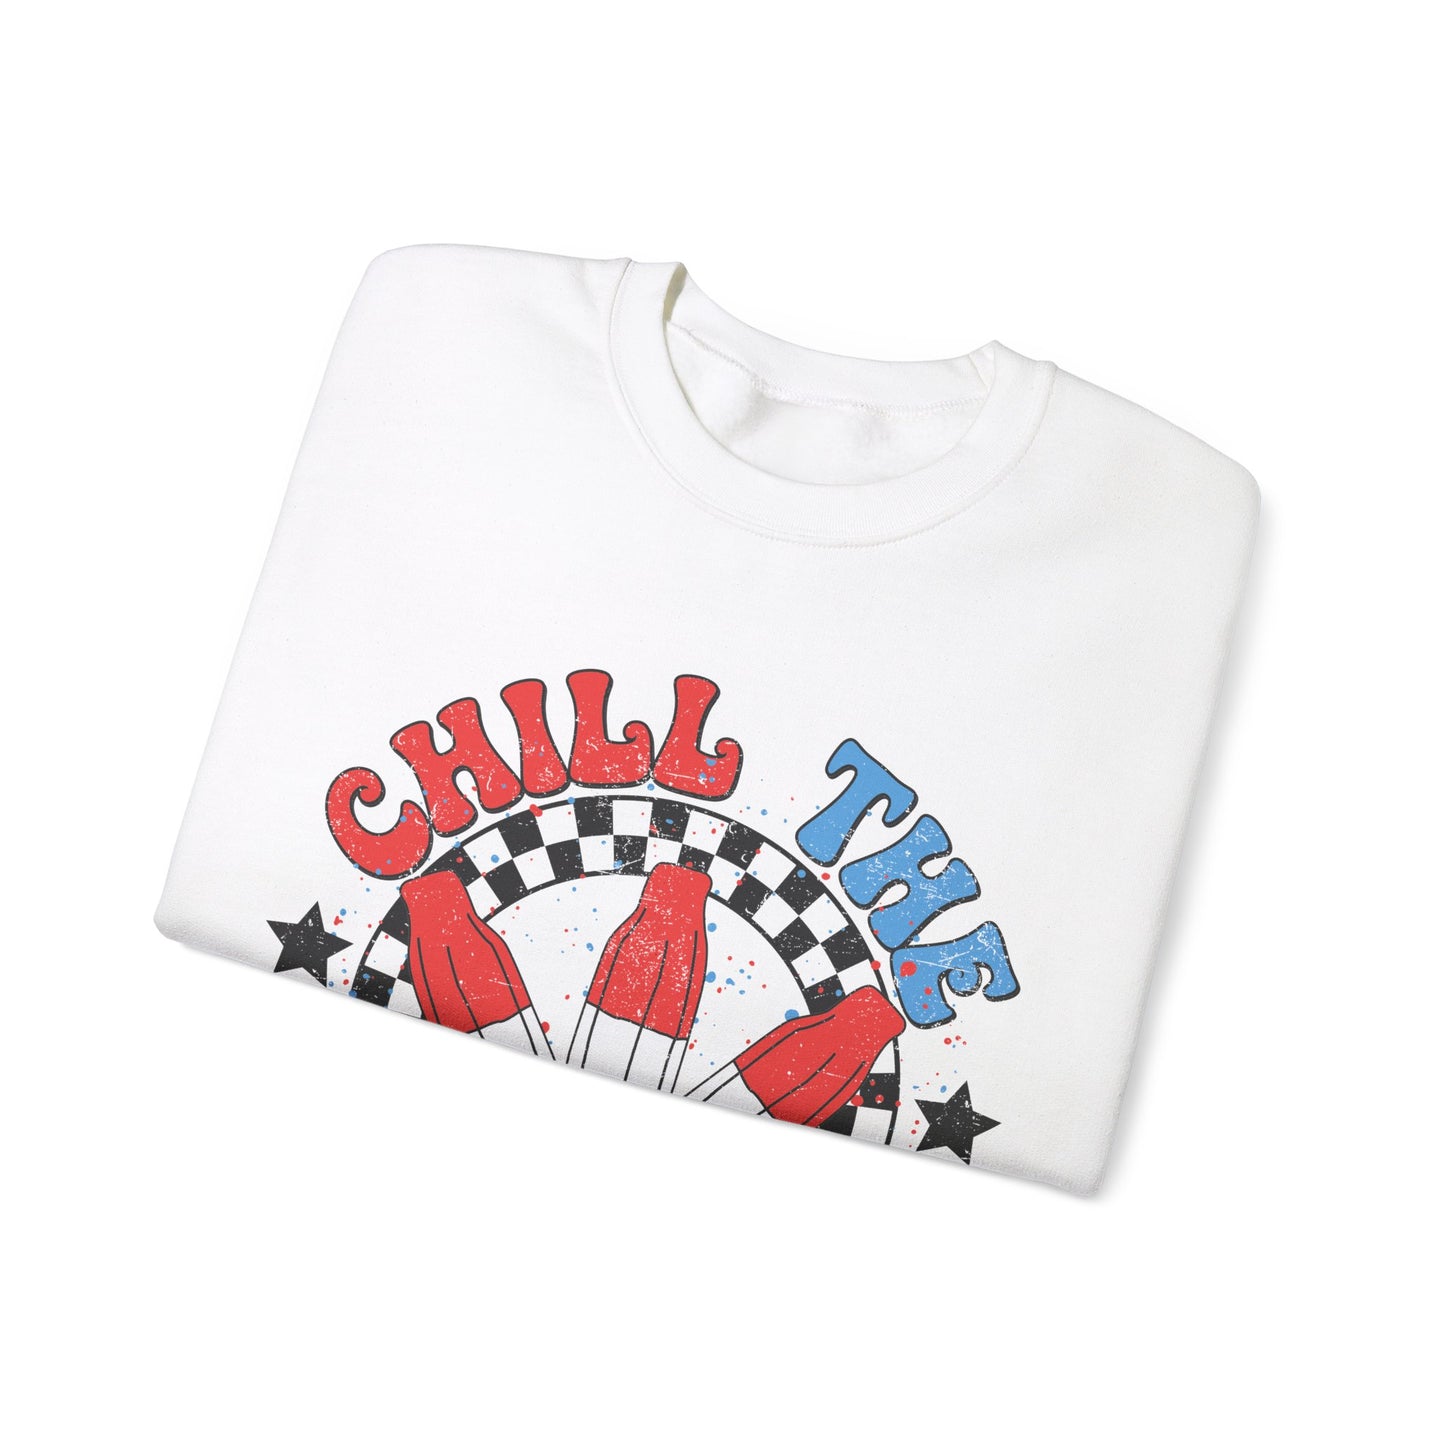 Chill the 4th Out - Crewneck Sweatshirt